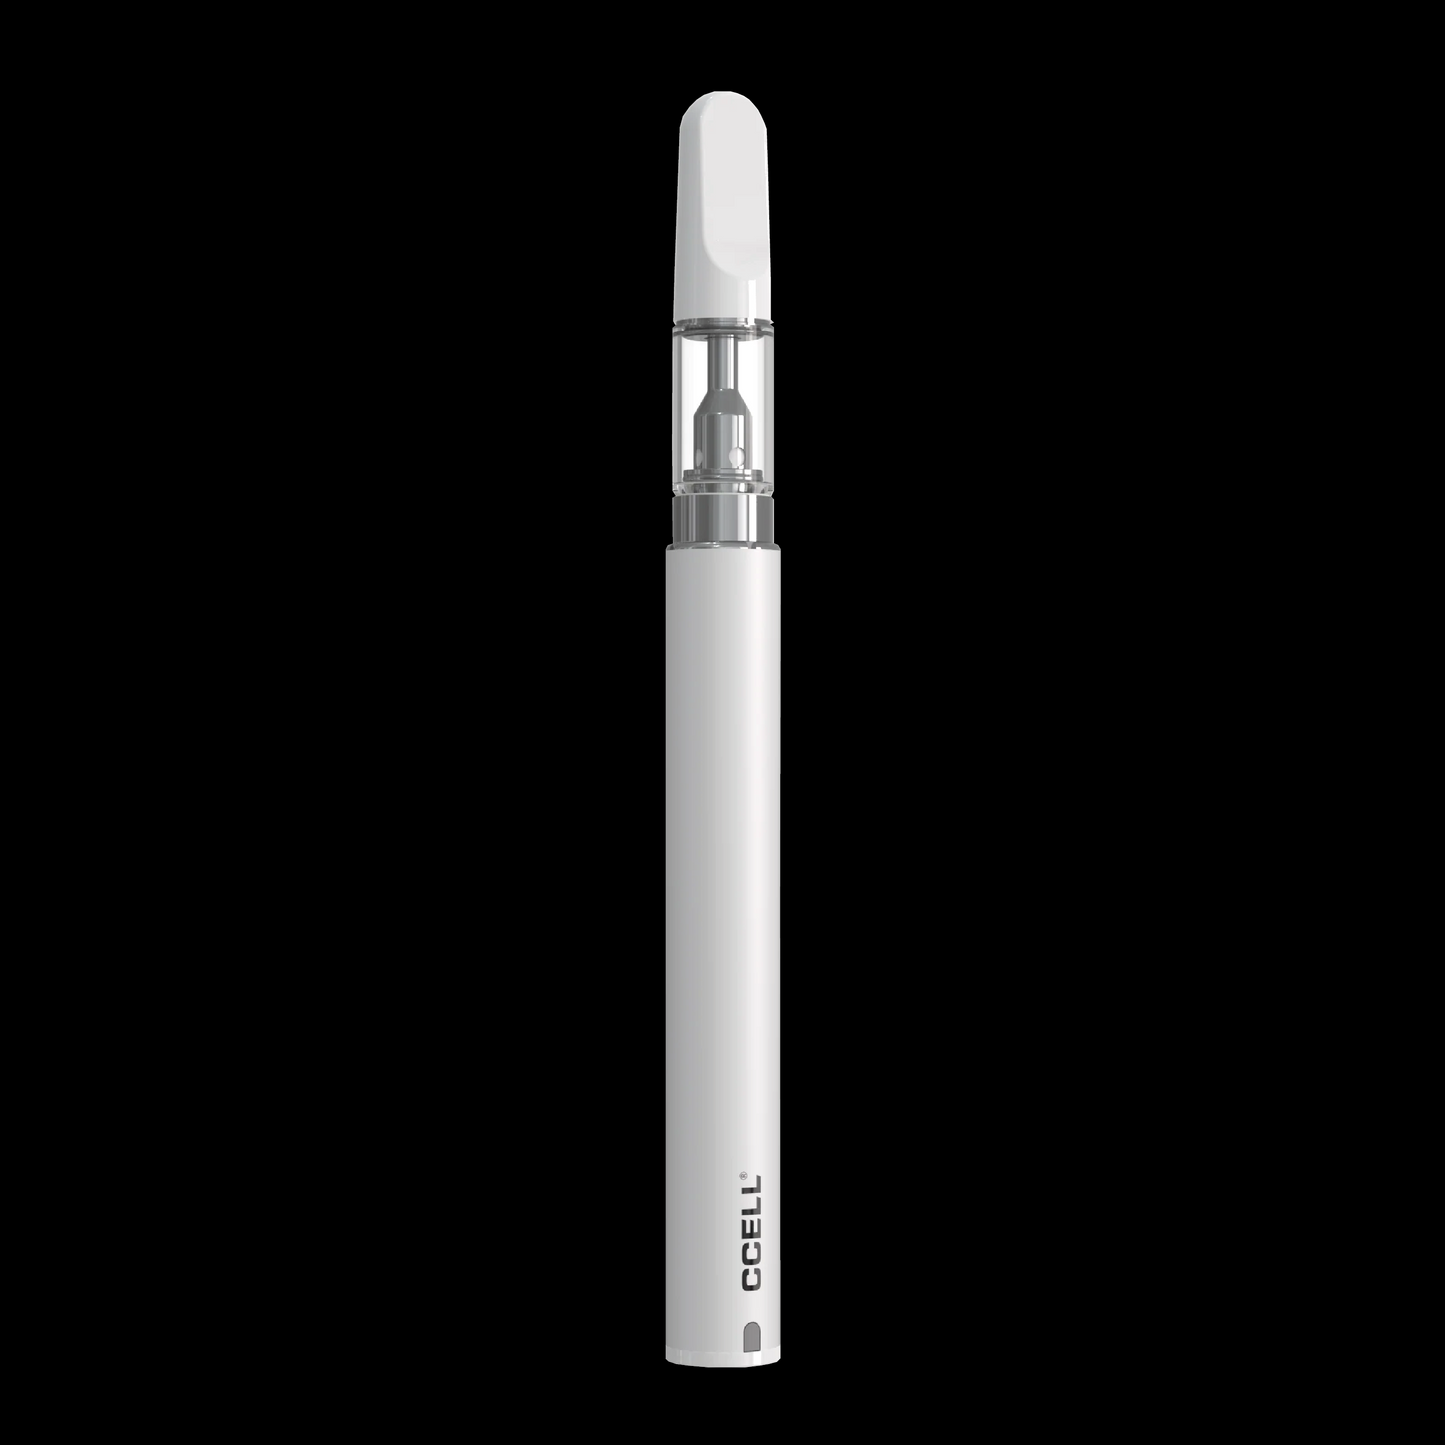 CCELL M3 PEN WHITE